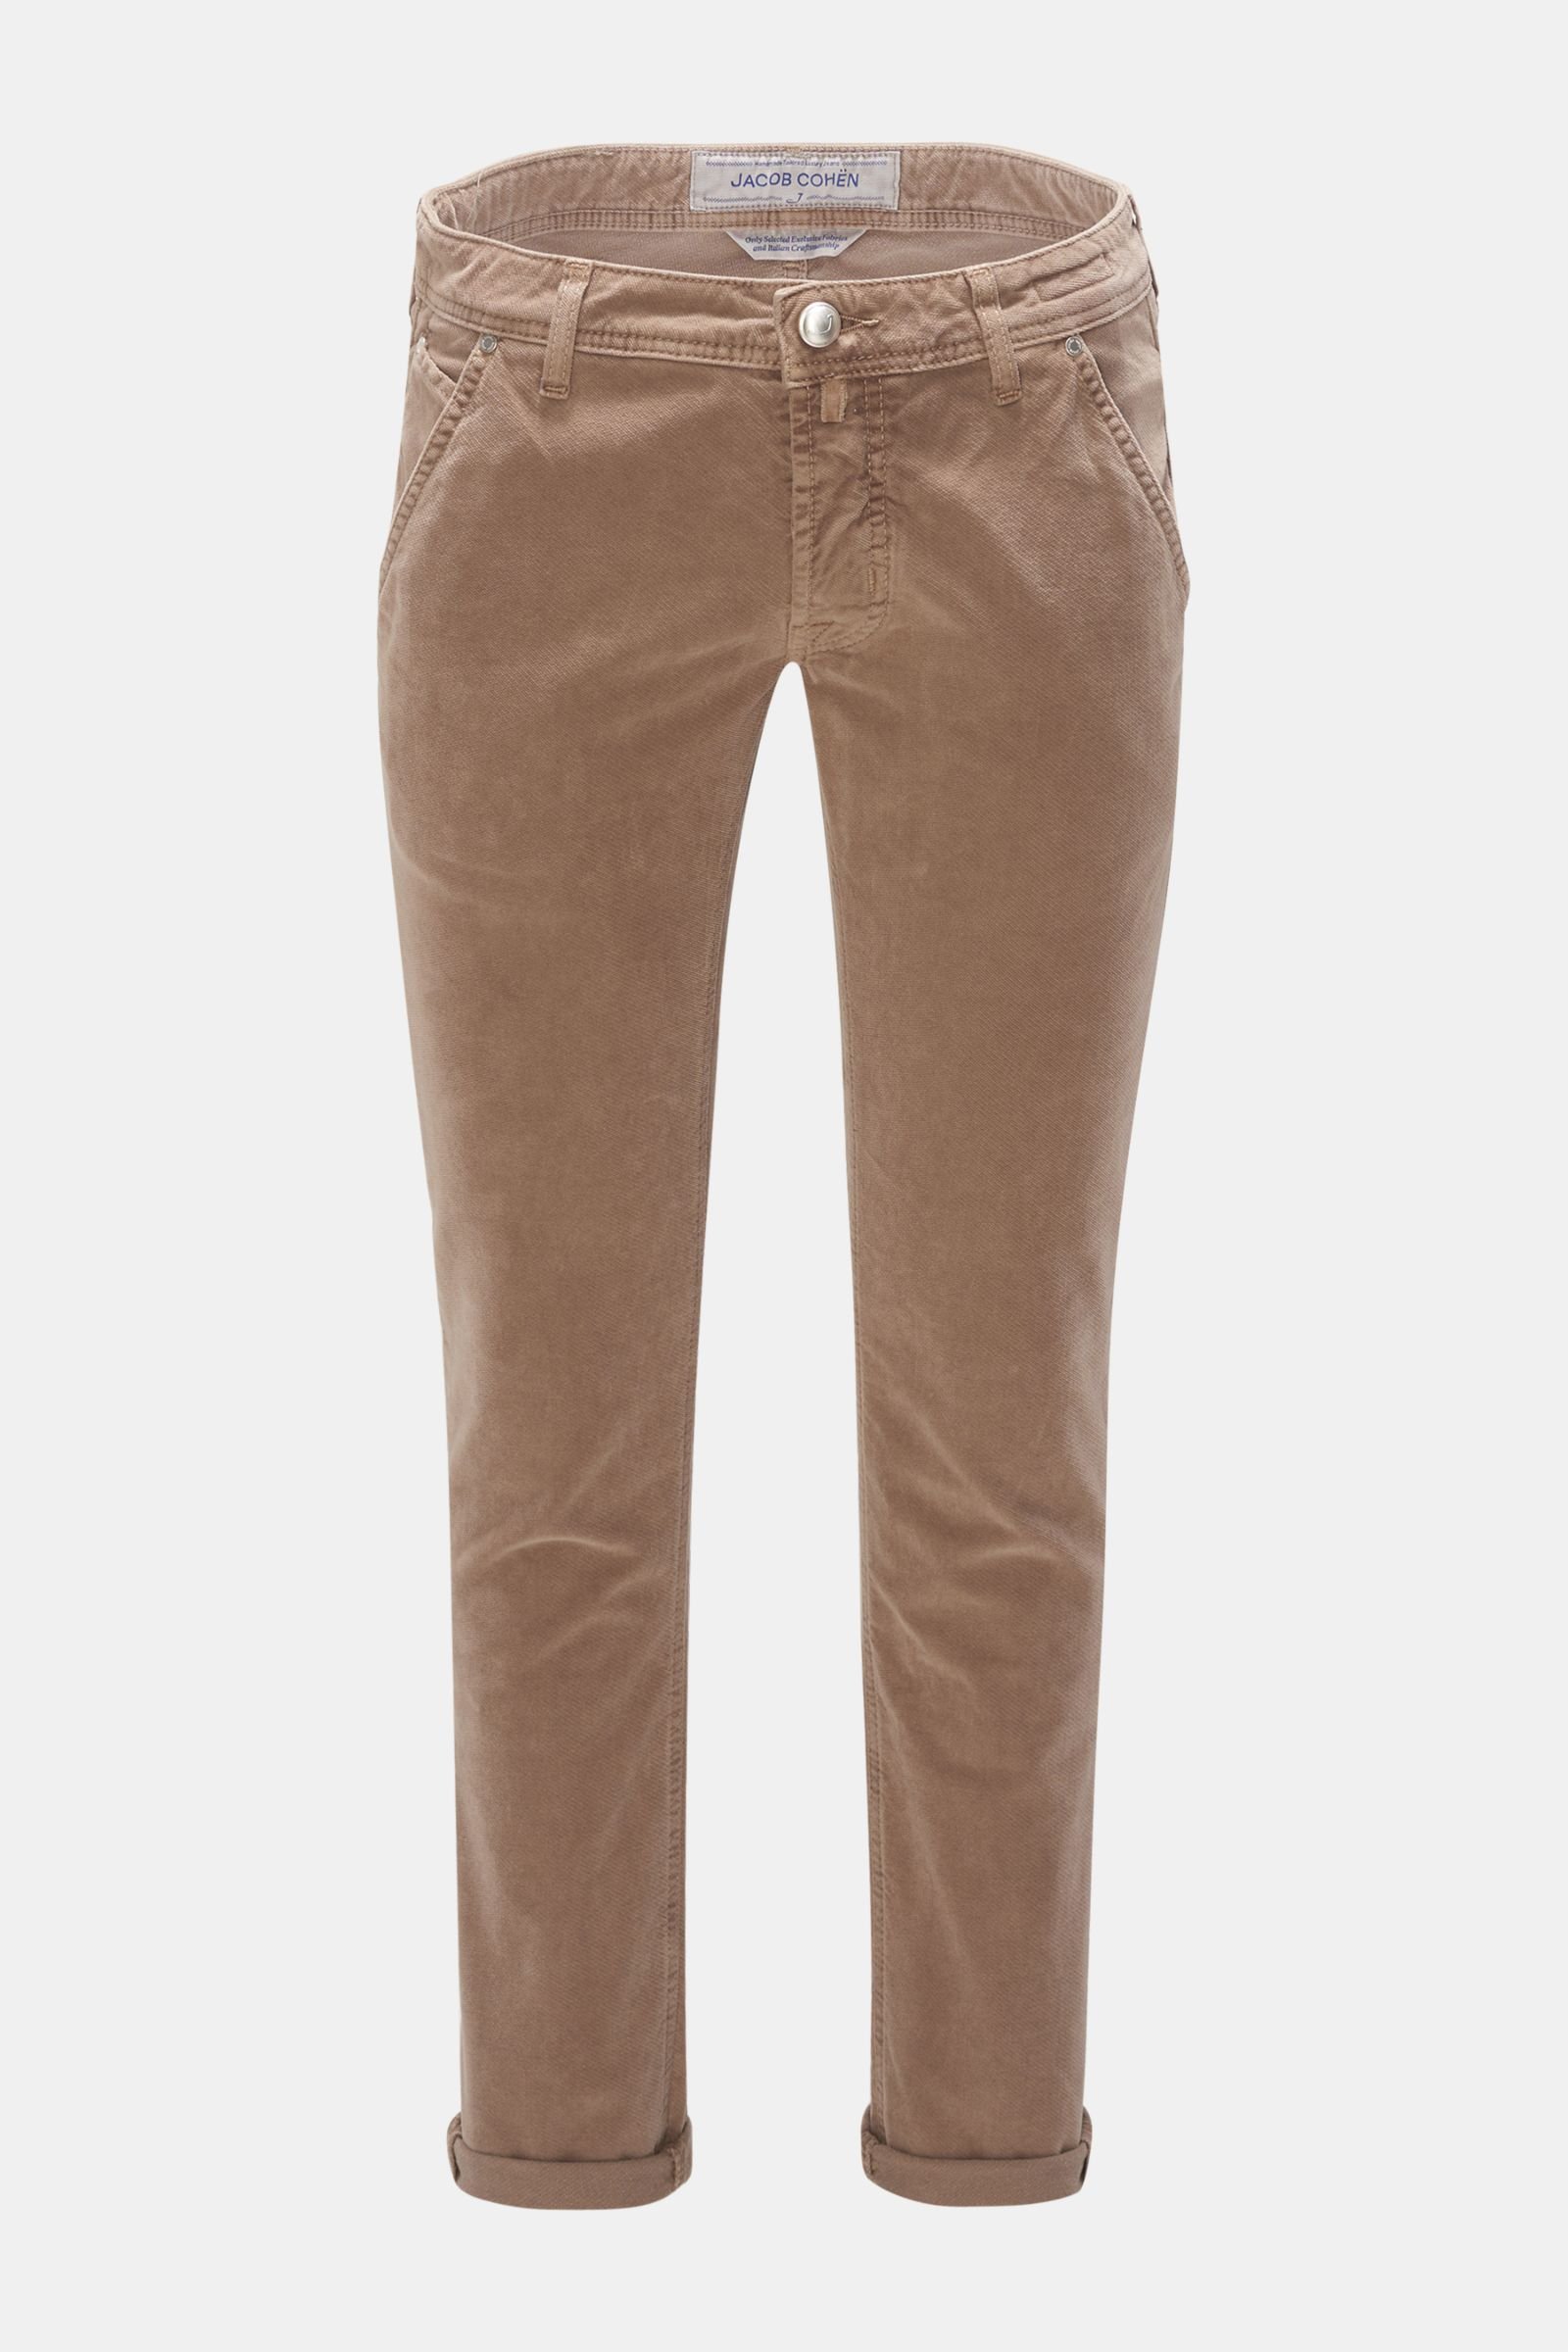 Cotton trousers 'J613 Comfort Extra Slim Fit' light brown